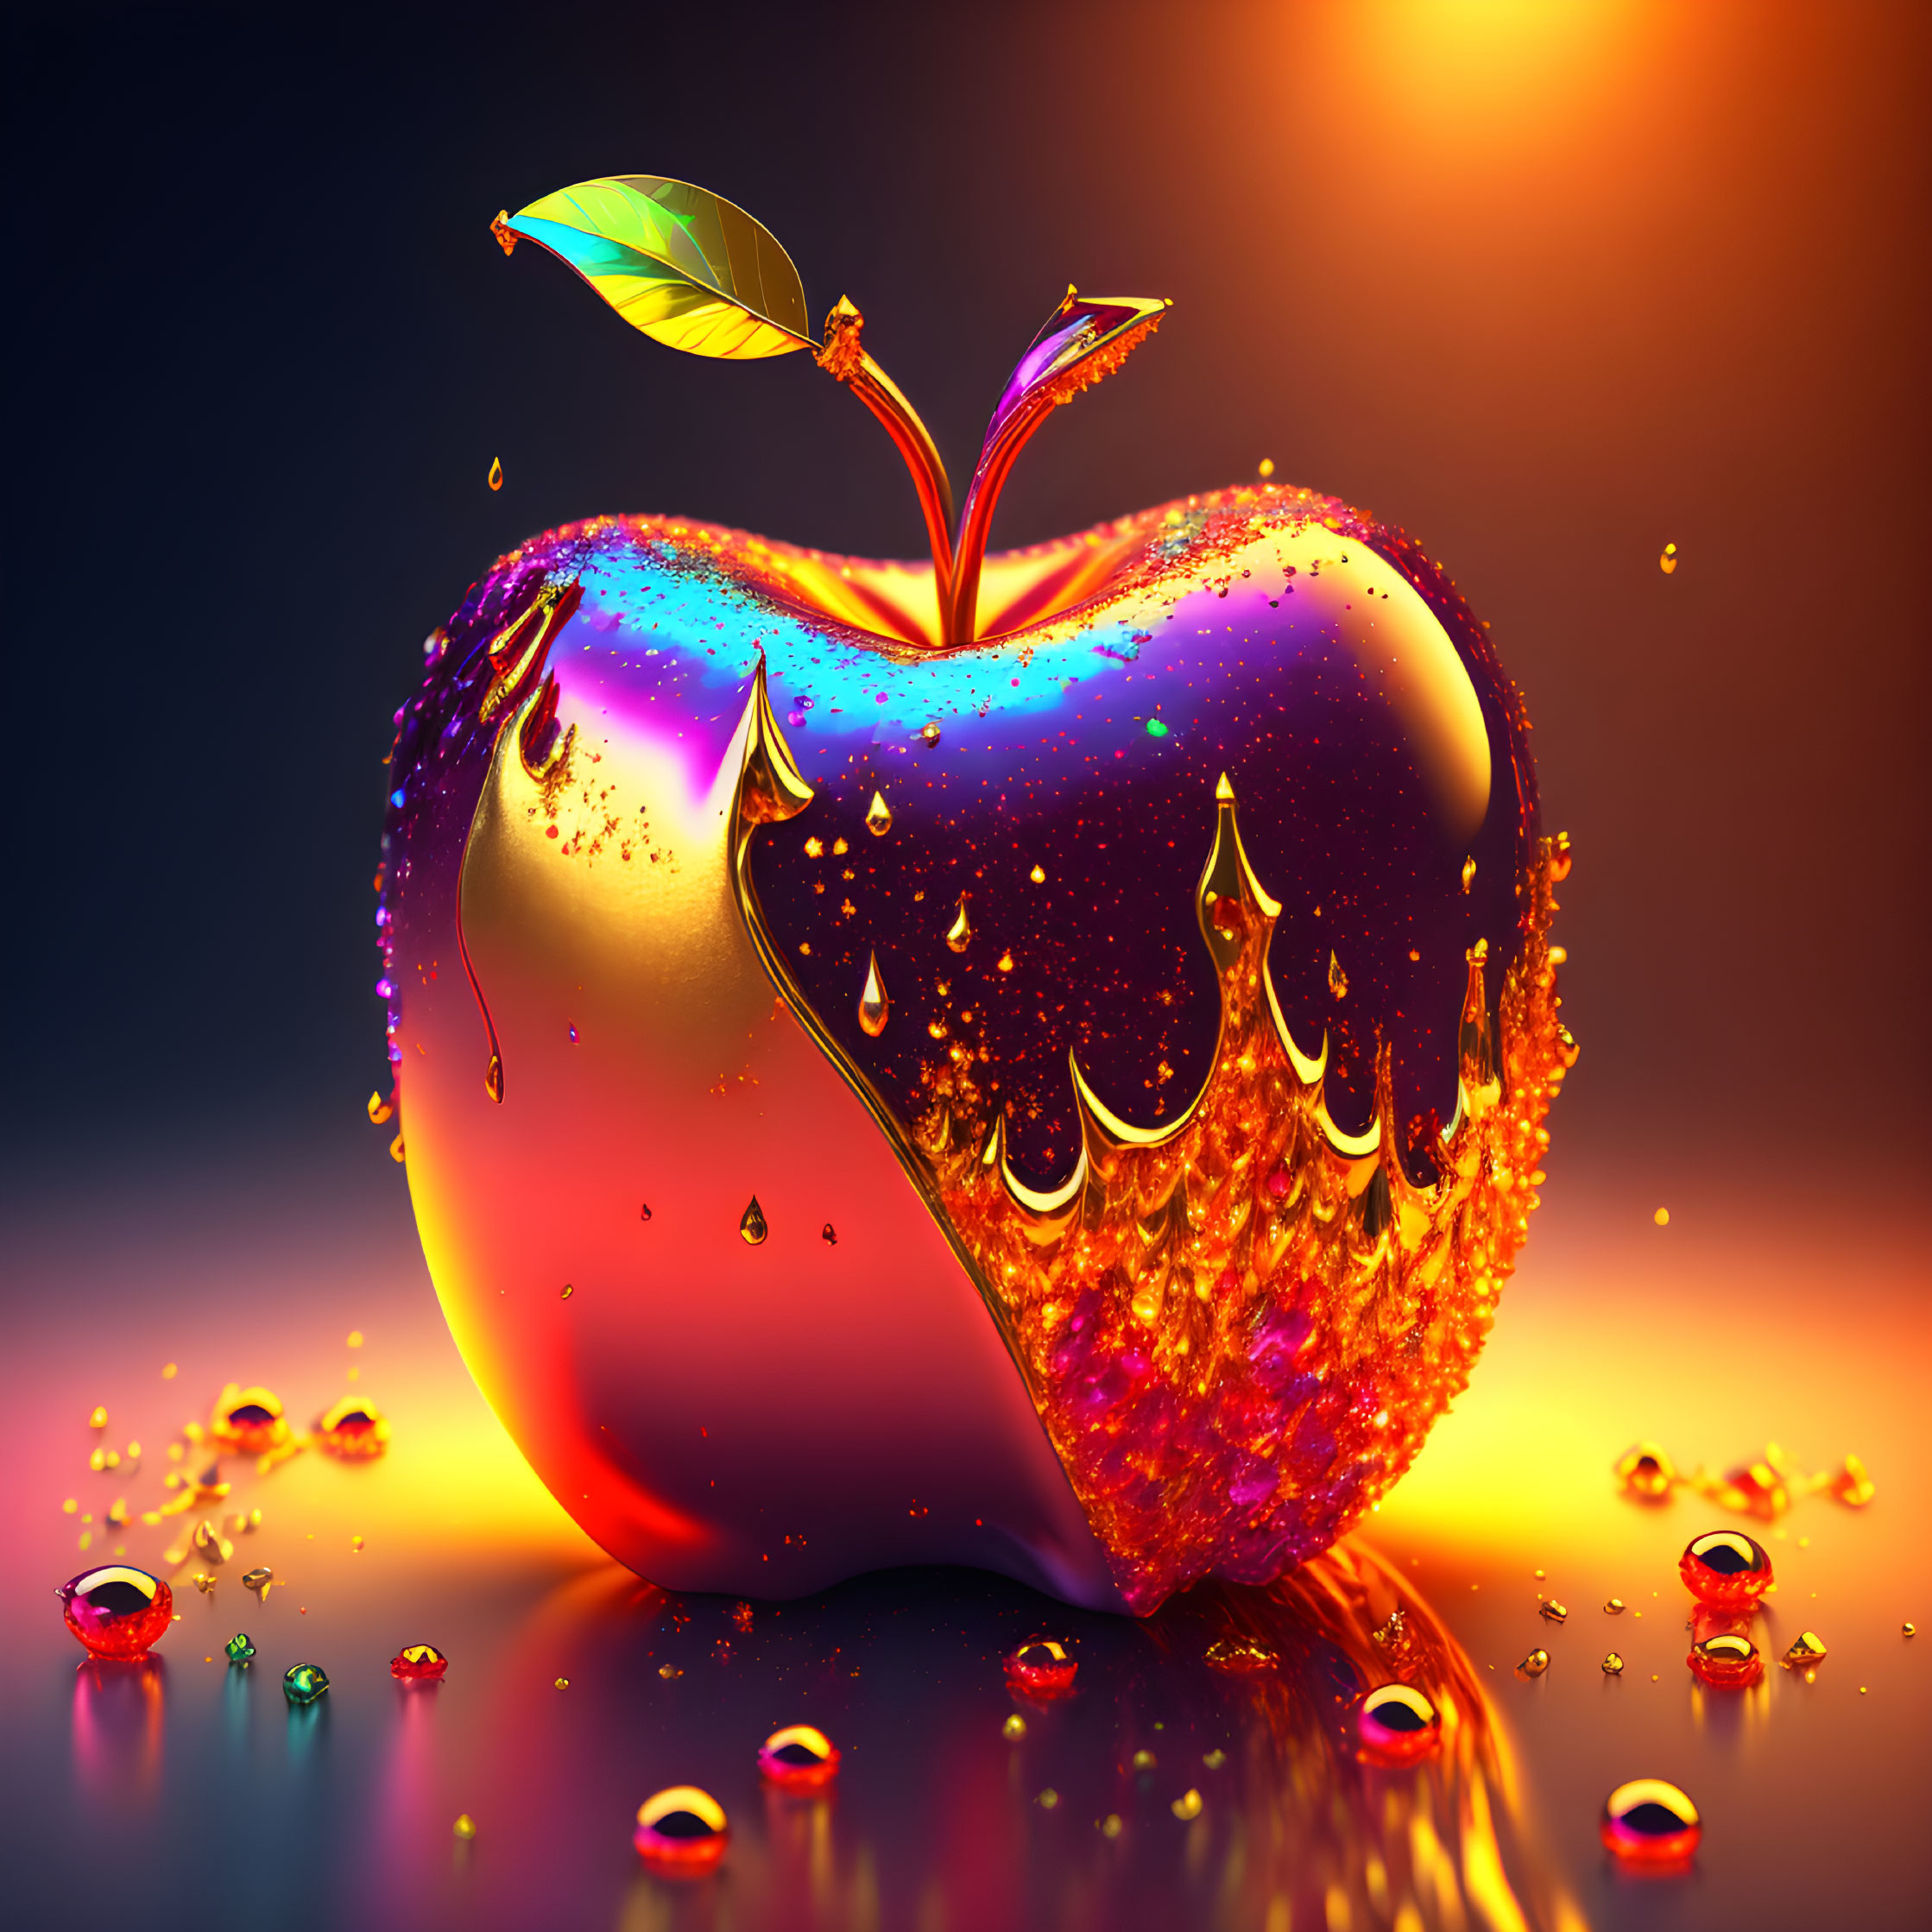 Colorful digital artwork of glossy apple with rainbow surface and golden droplets on warm backdrop